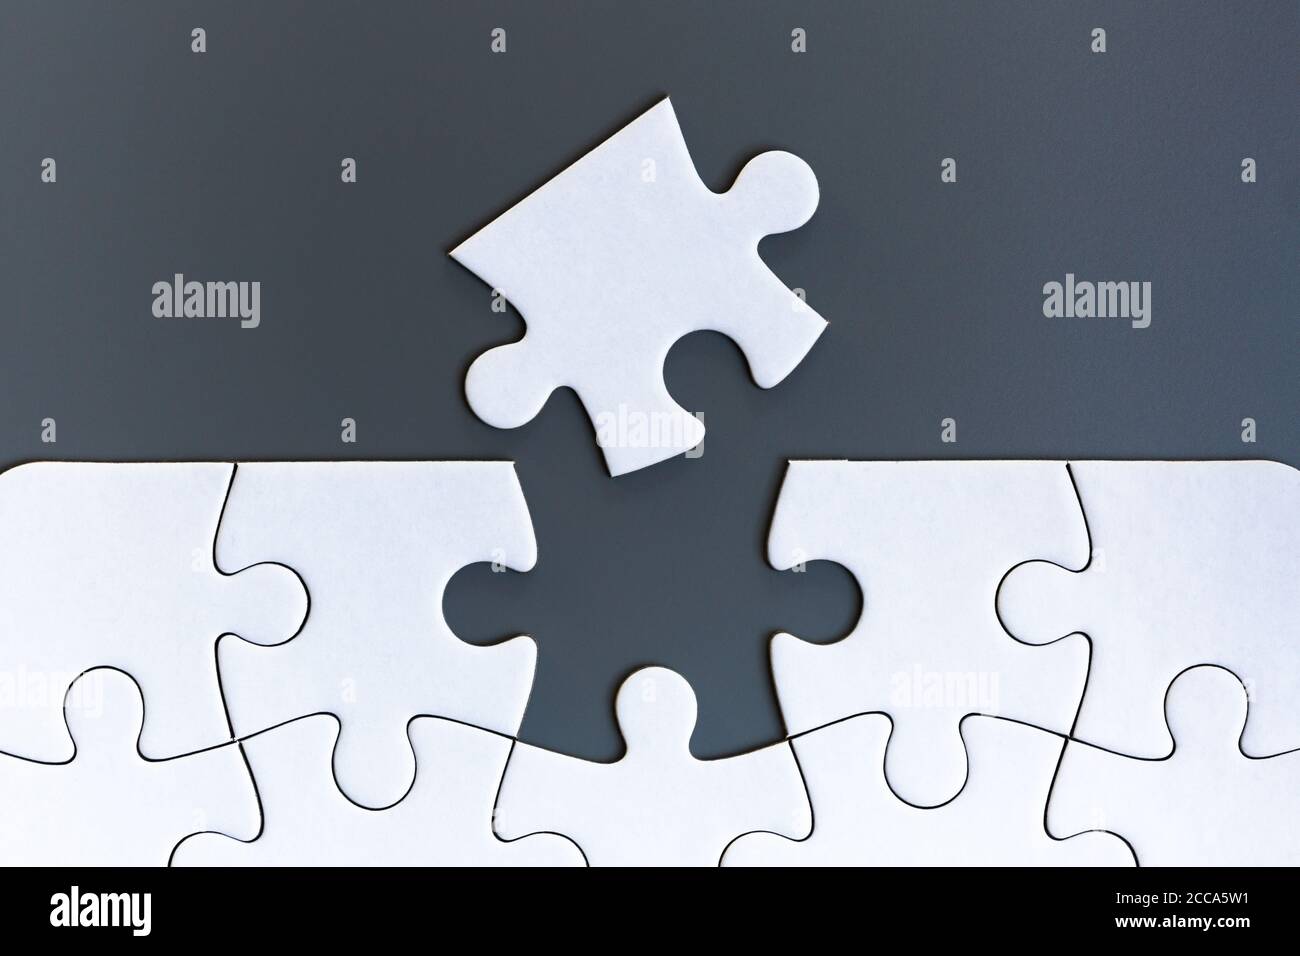 White jigsaw puzzle pieces on gray background Stock Photo